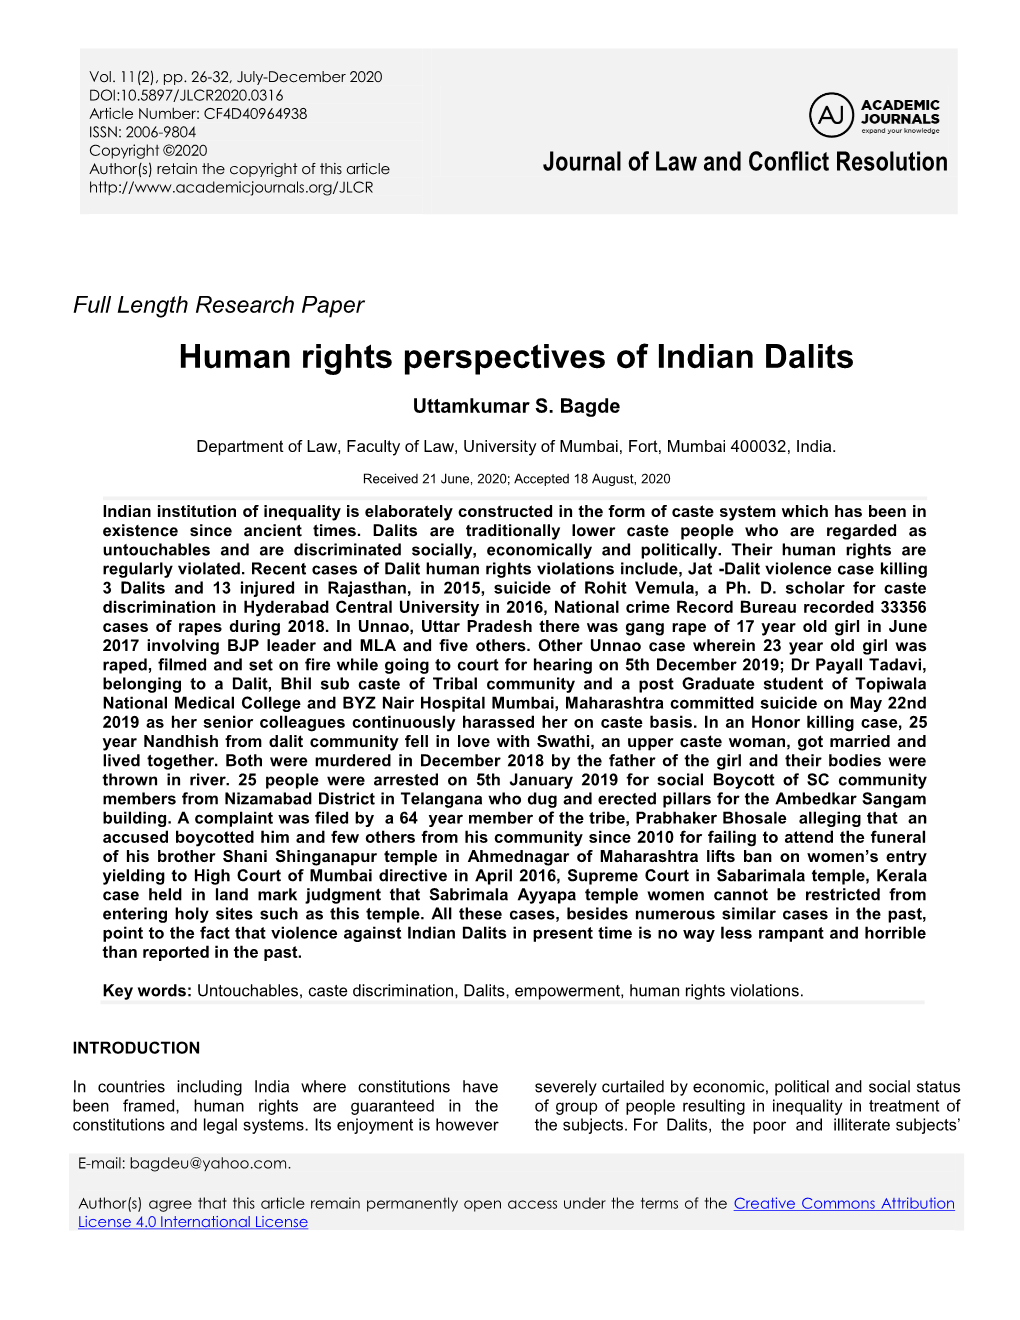 Human Rights Perspectives of Indian Dalits